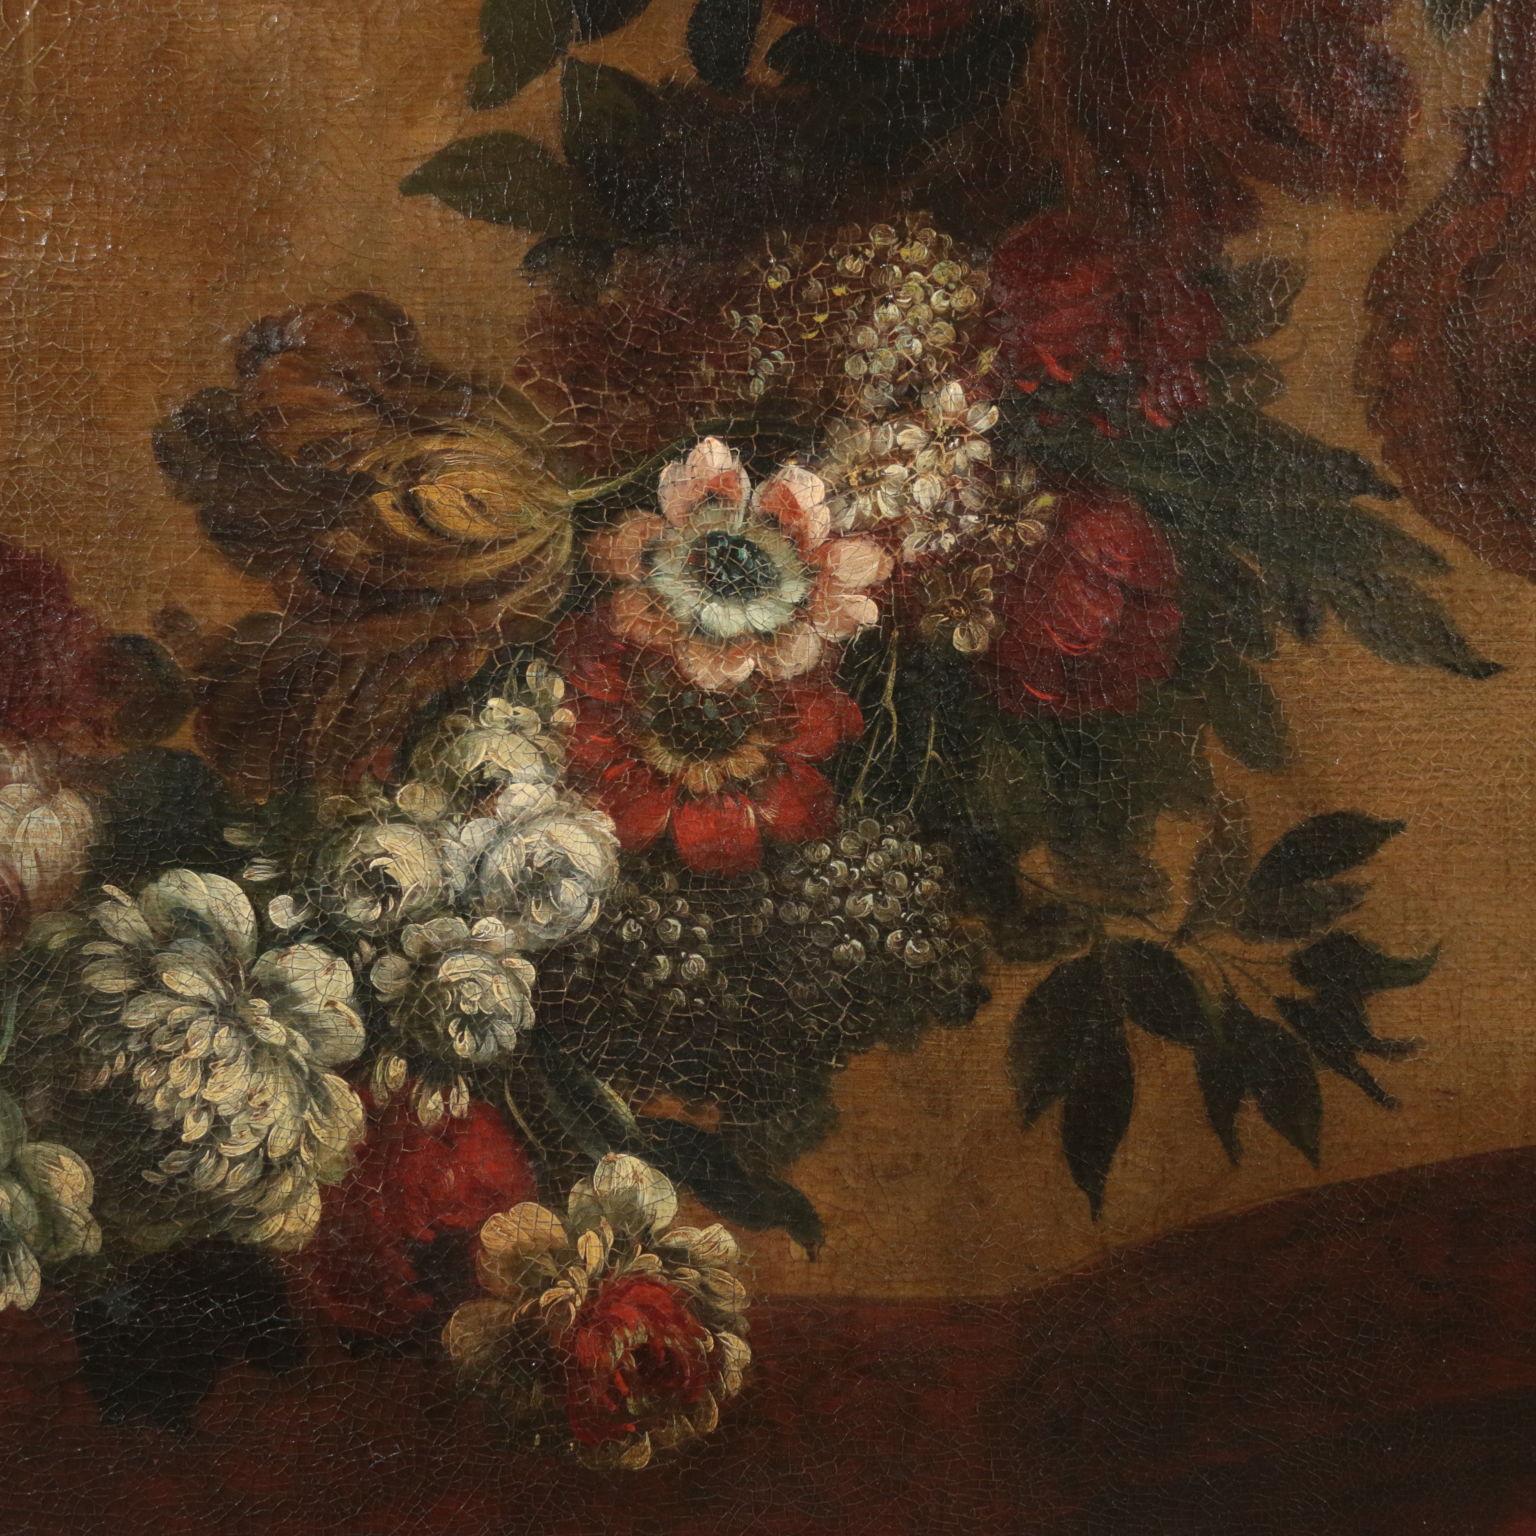 Large Still Life With Vase And Flowers Oil On Canvas 18th Century 1